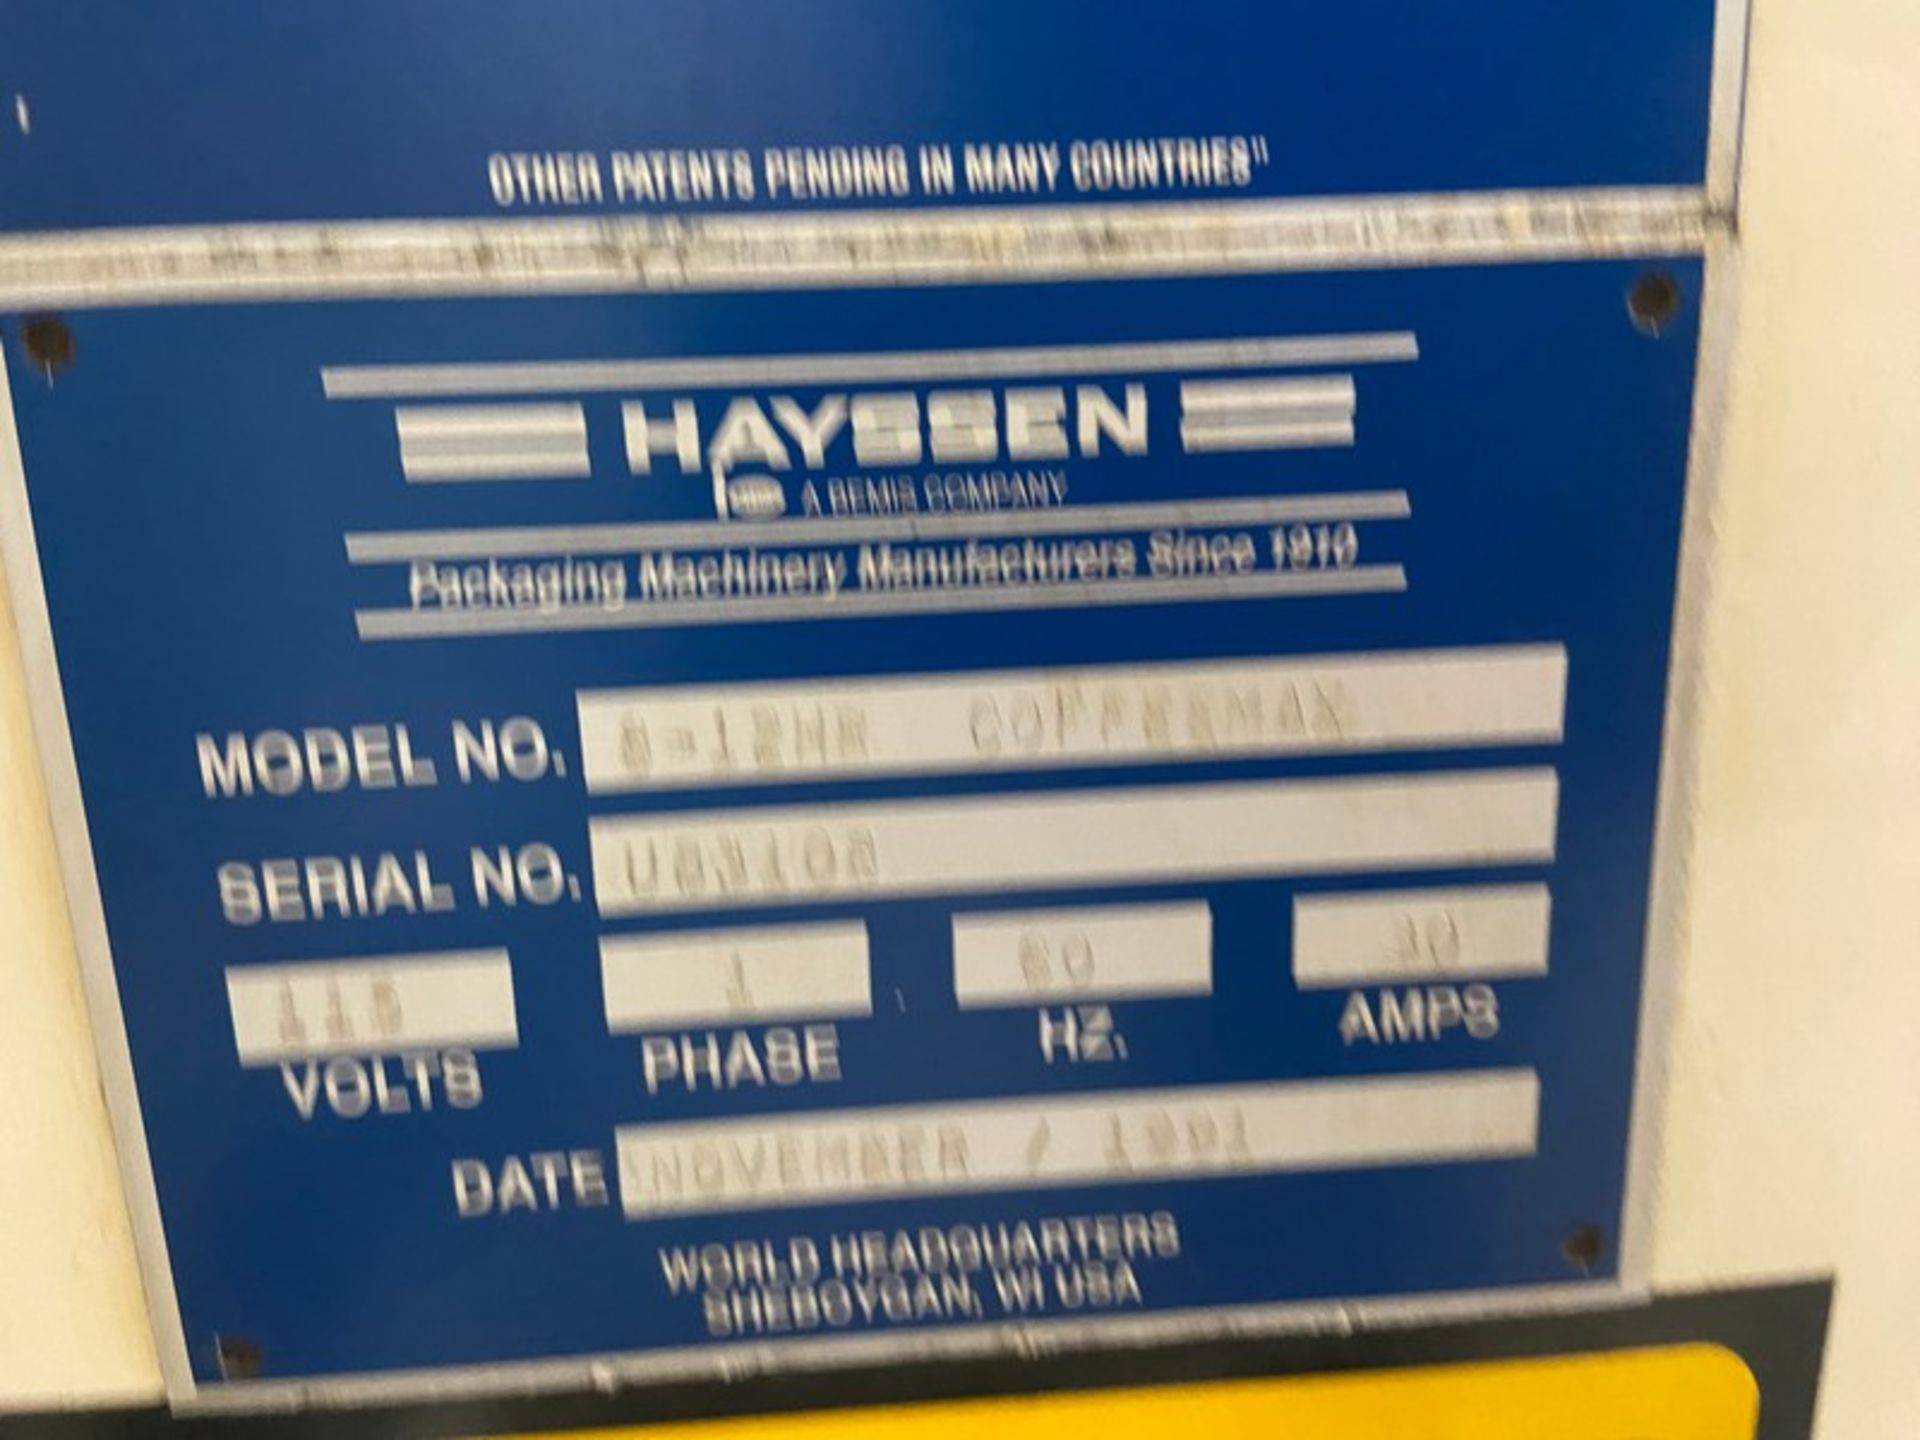 Hayssen VFFS, M/N 8-12HR COFFEEMAX, S/N U83108, 115 Volts, 3 Phase, with Forming Tube, with Mateer- - Image 8 of 15